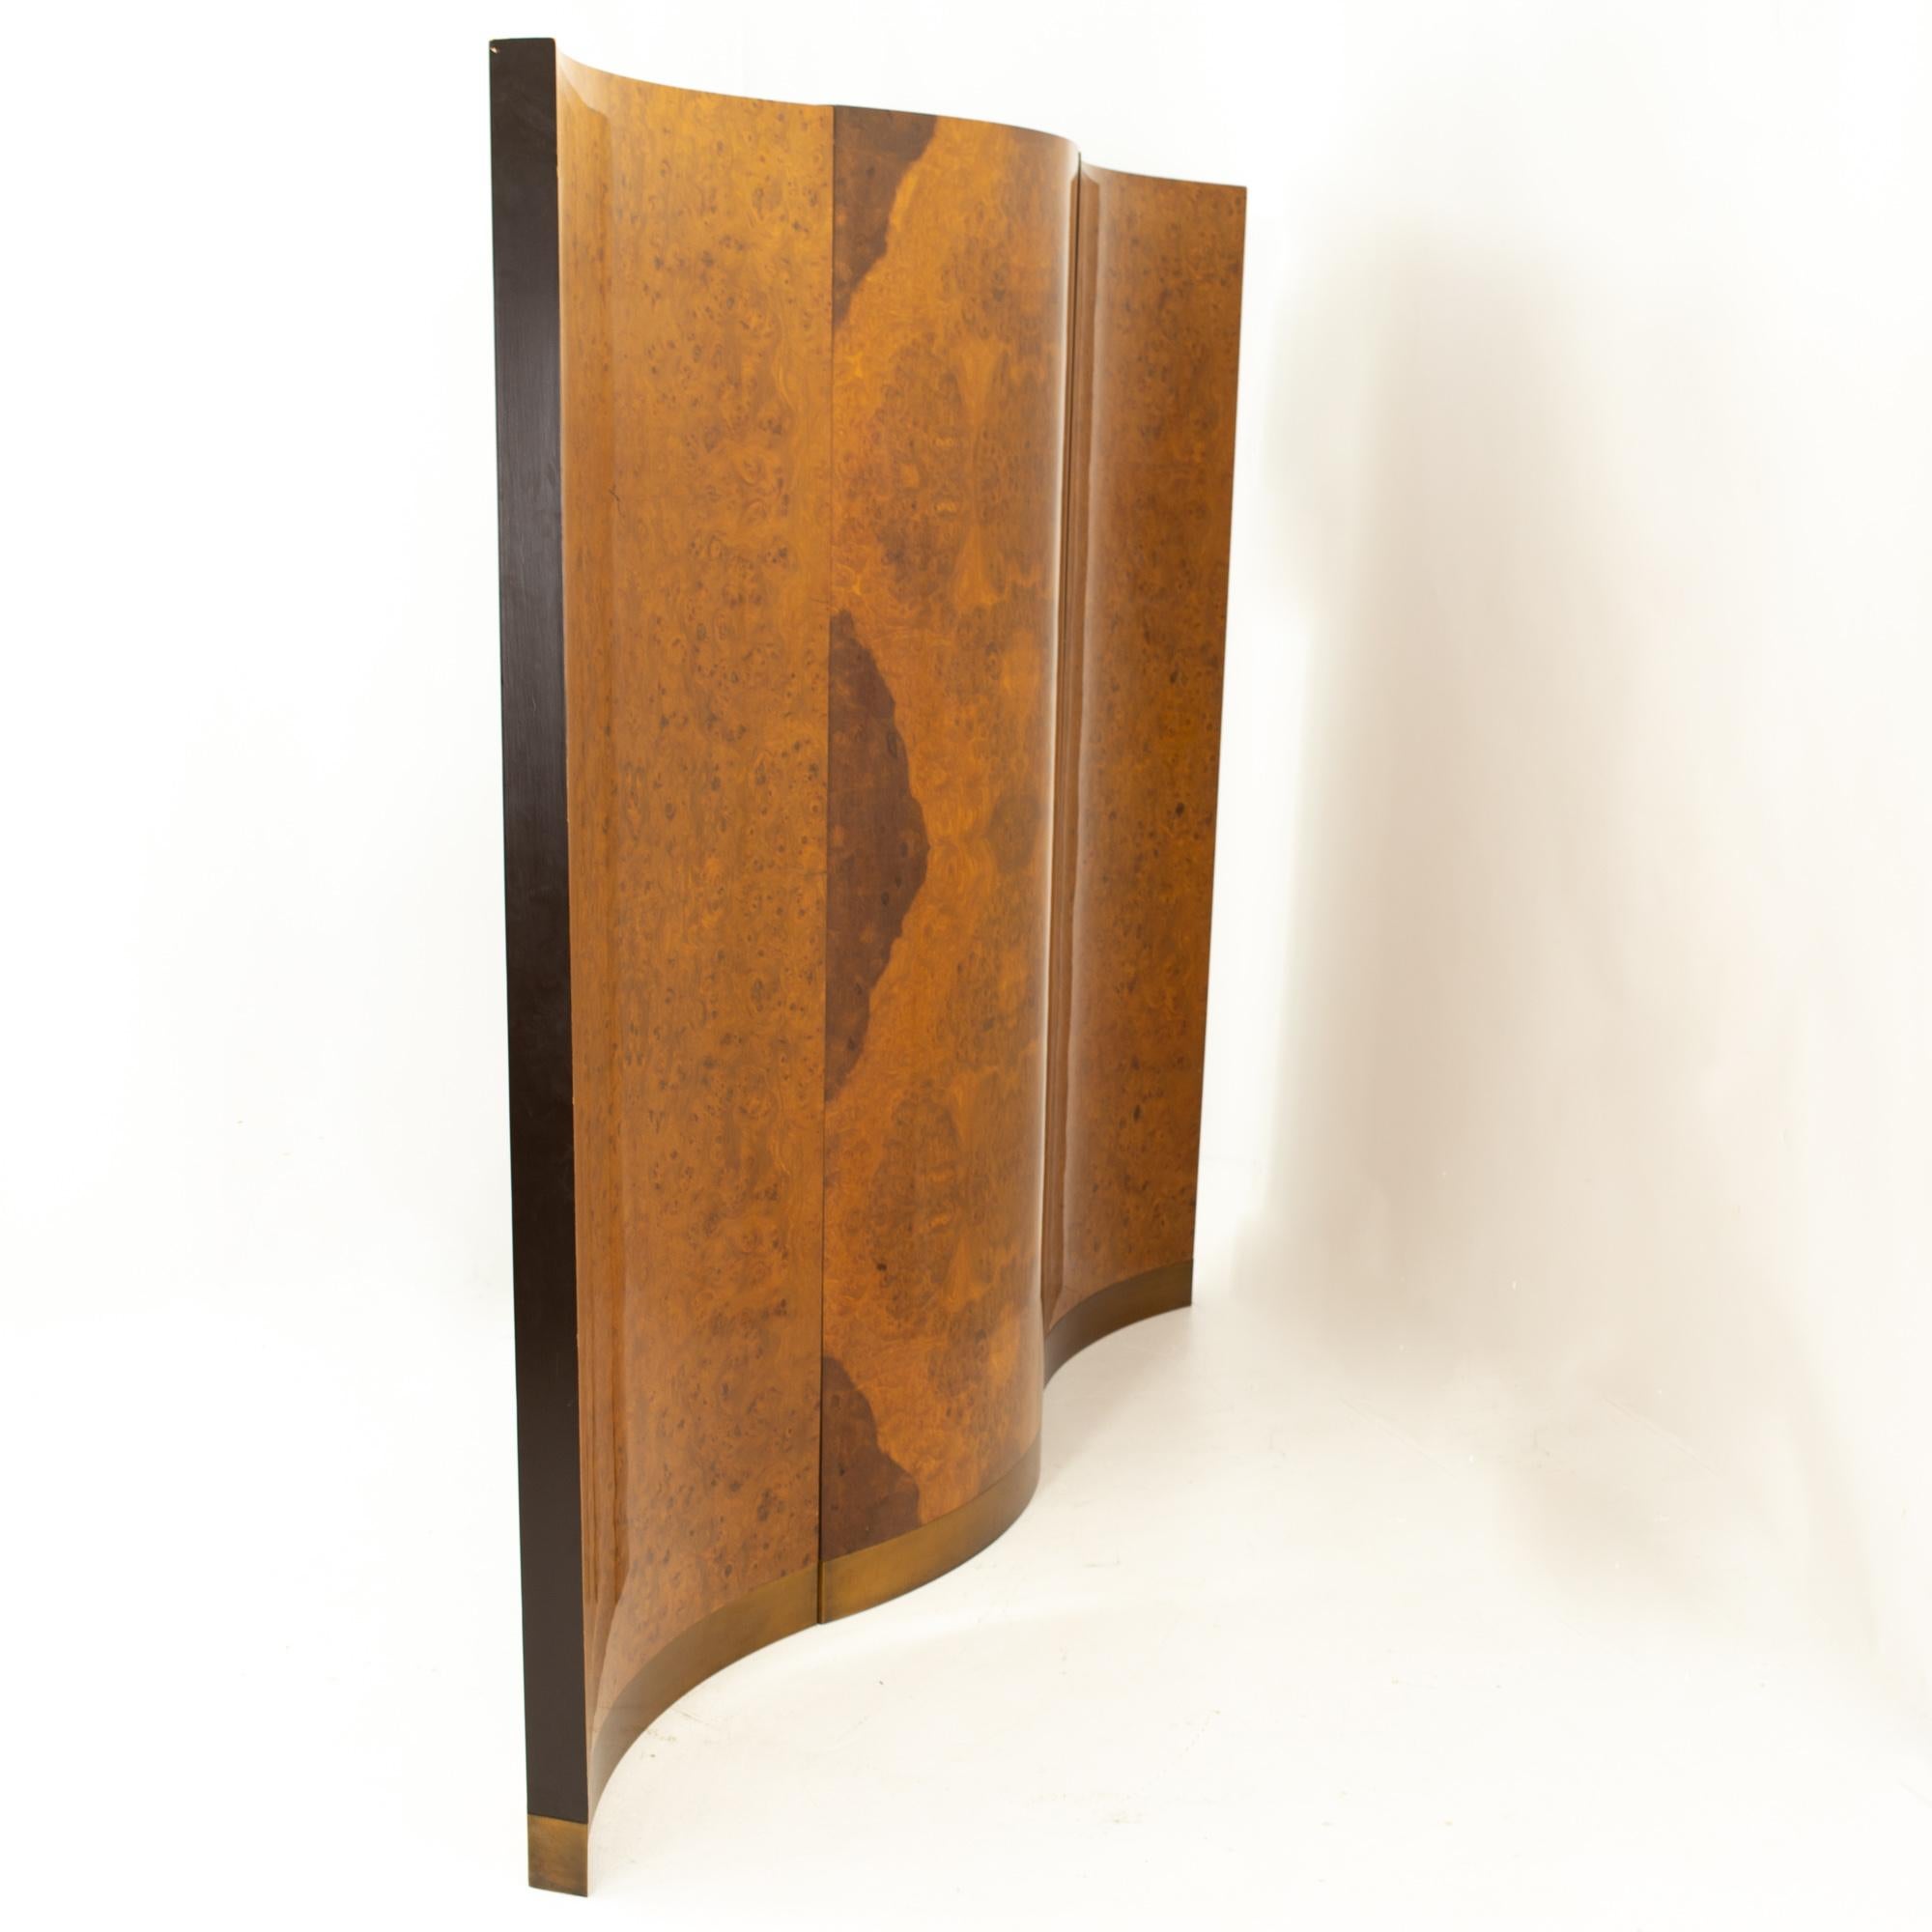 Milo Baughman style Mid Century burl wood room divider
Room divider with 3 sections; each measures:  34.5 wide x 3 deep x 87.5 high

All pieces of furniture can be had in what we call restored vintage condition. This means the piece is restored upon